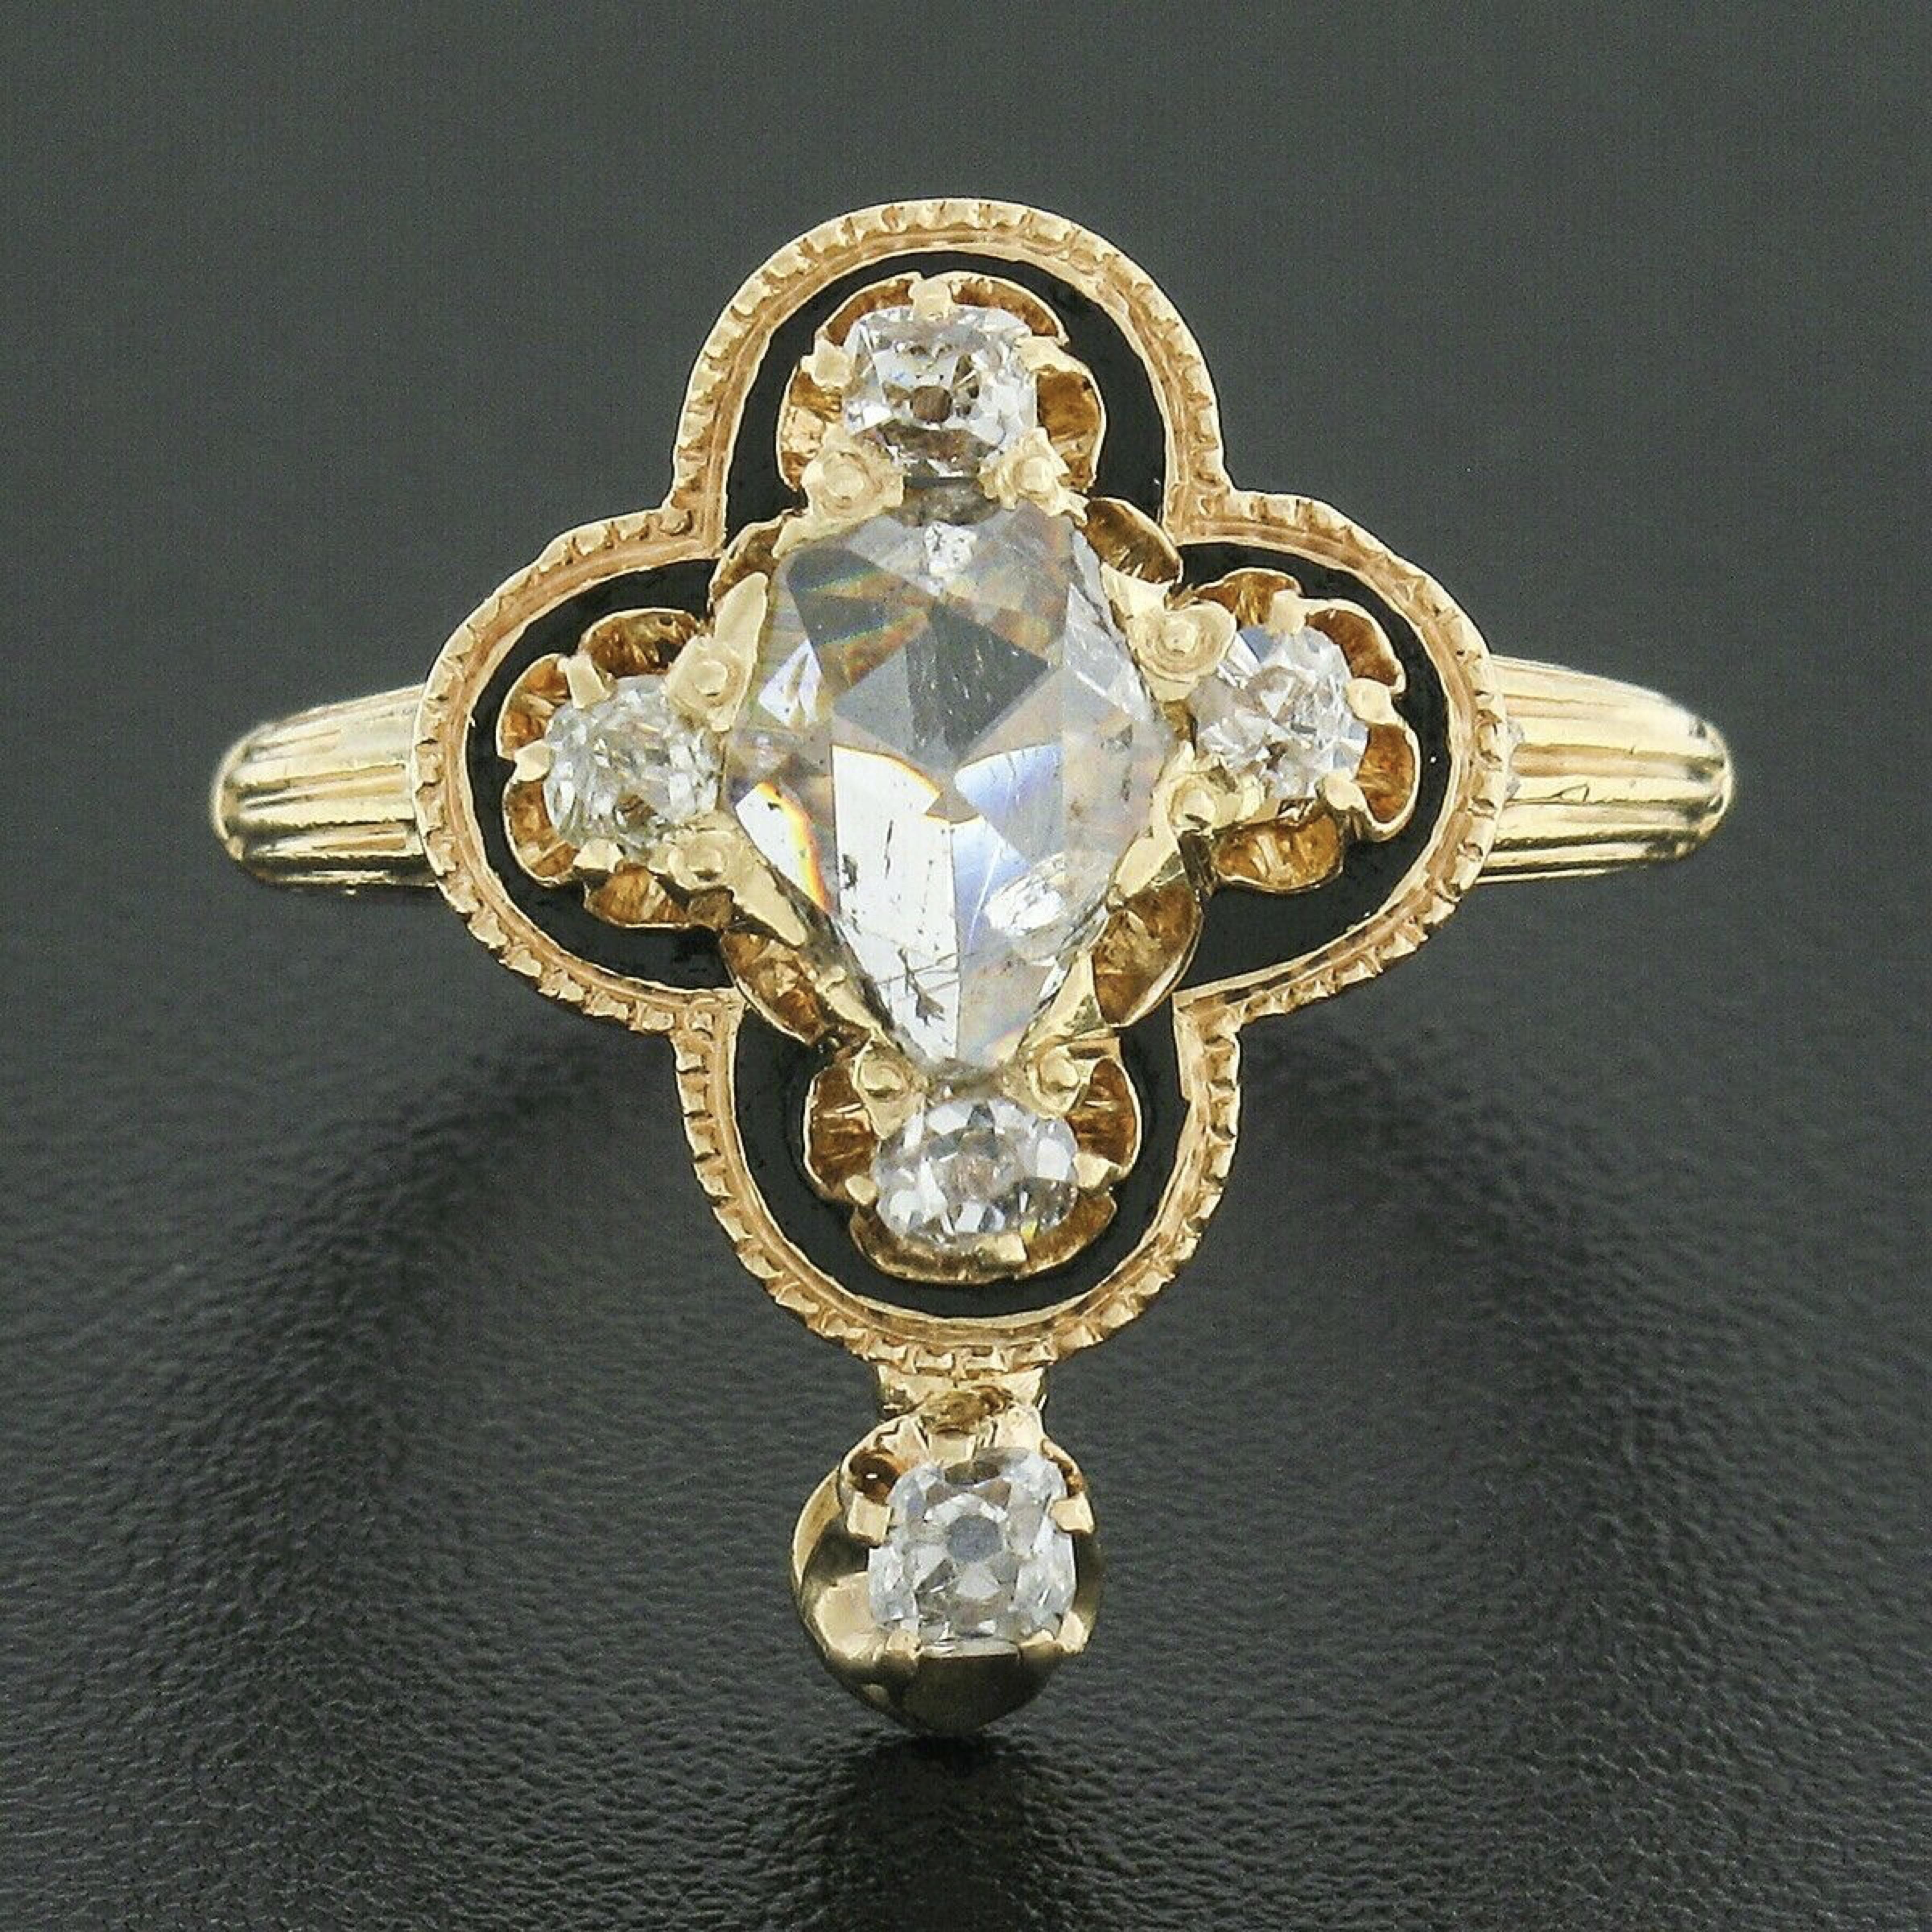 Here we have a gorgeous and unique-looking antique ring crafted from solid 14k yellow gold during the Victorian era. It features a spectacular quatrefoil design set with a fine quality pear-shaped rose cut diamond solitaire at its center, weighing